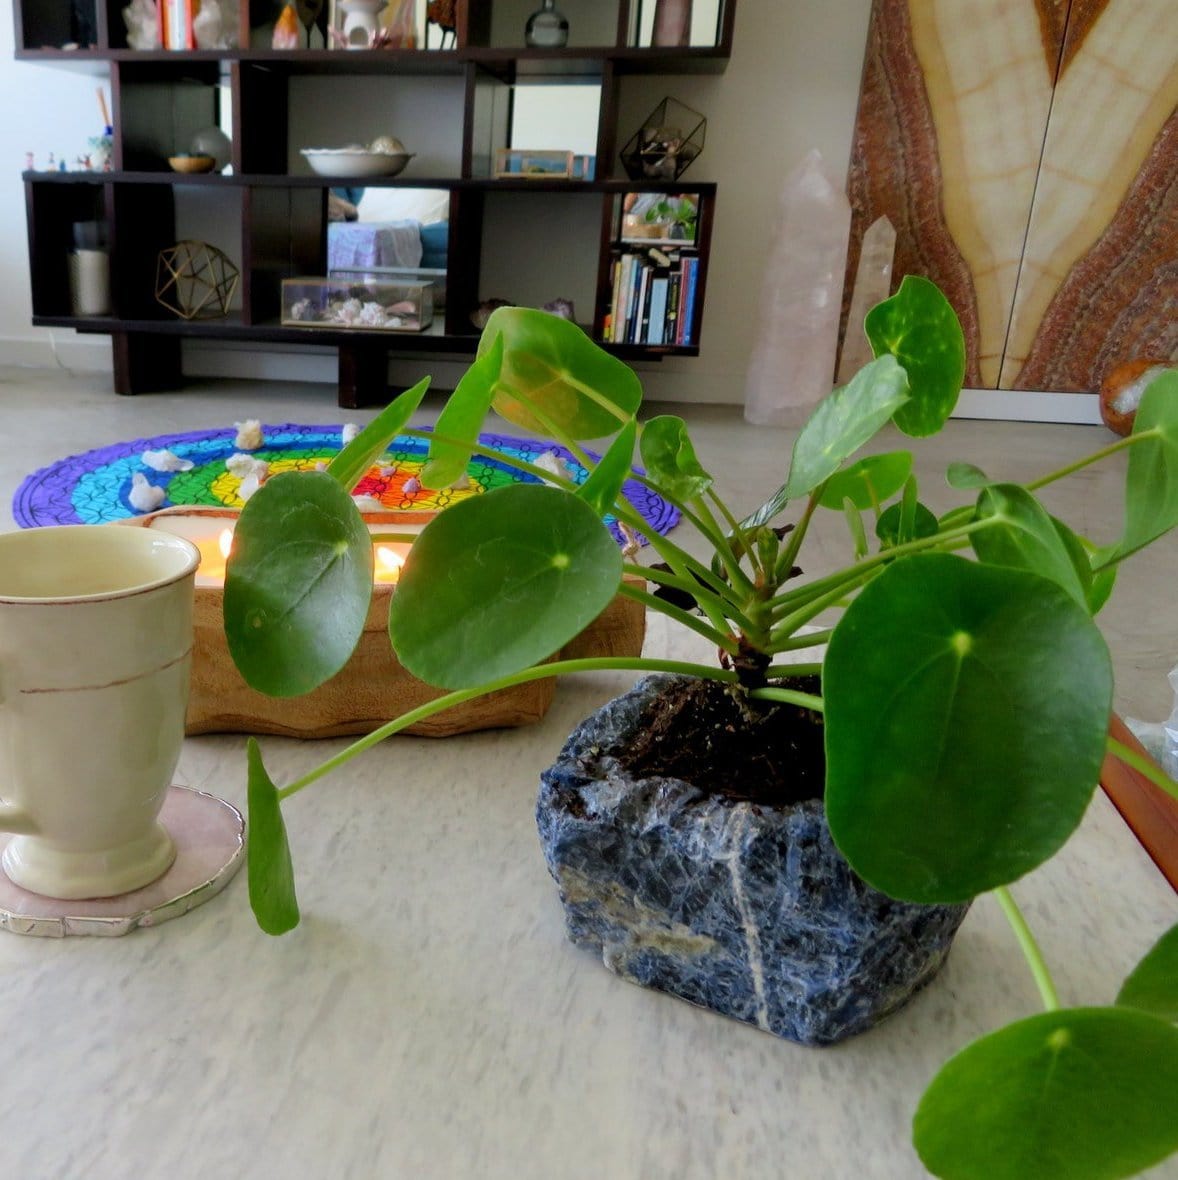 one sodalite planter with a plant inside on display in a home